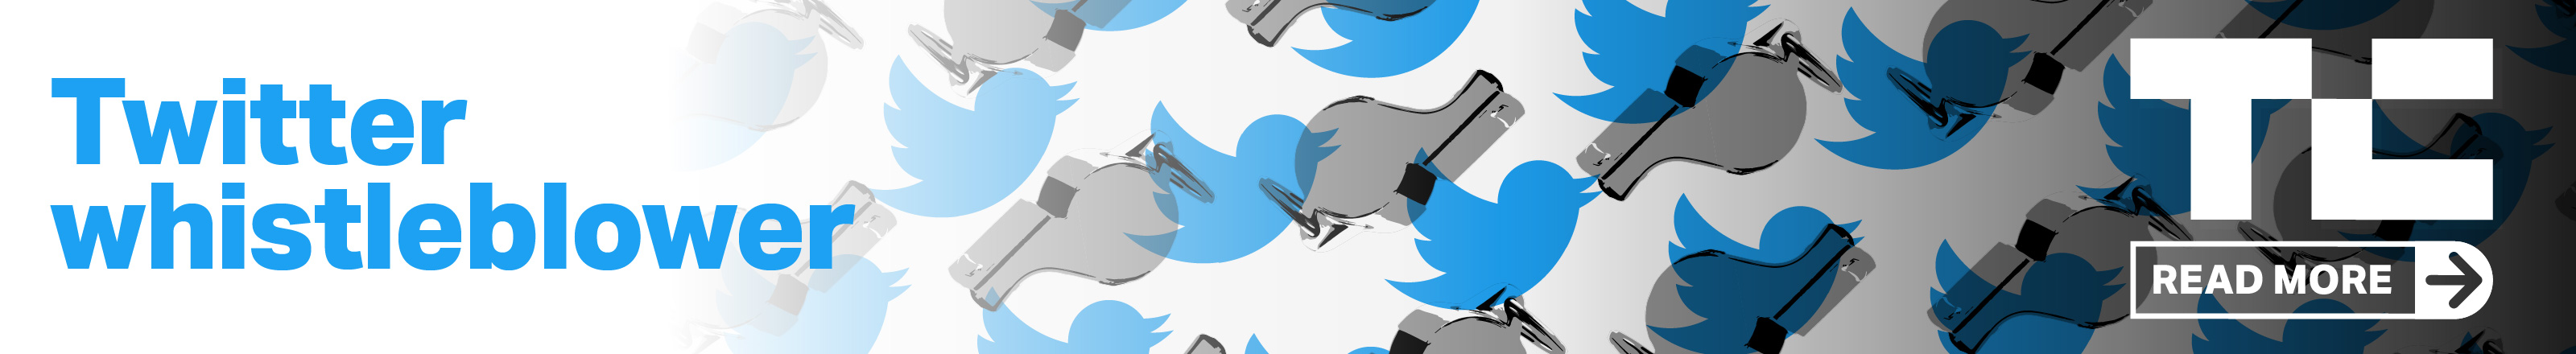 read more about the Twitter whistleblower on TechCrunch